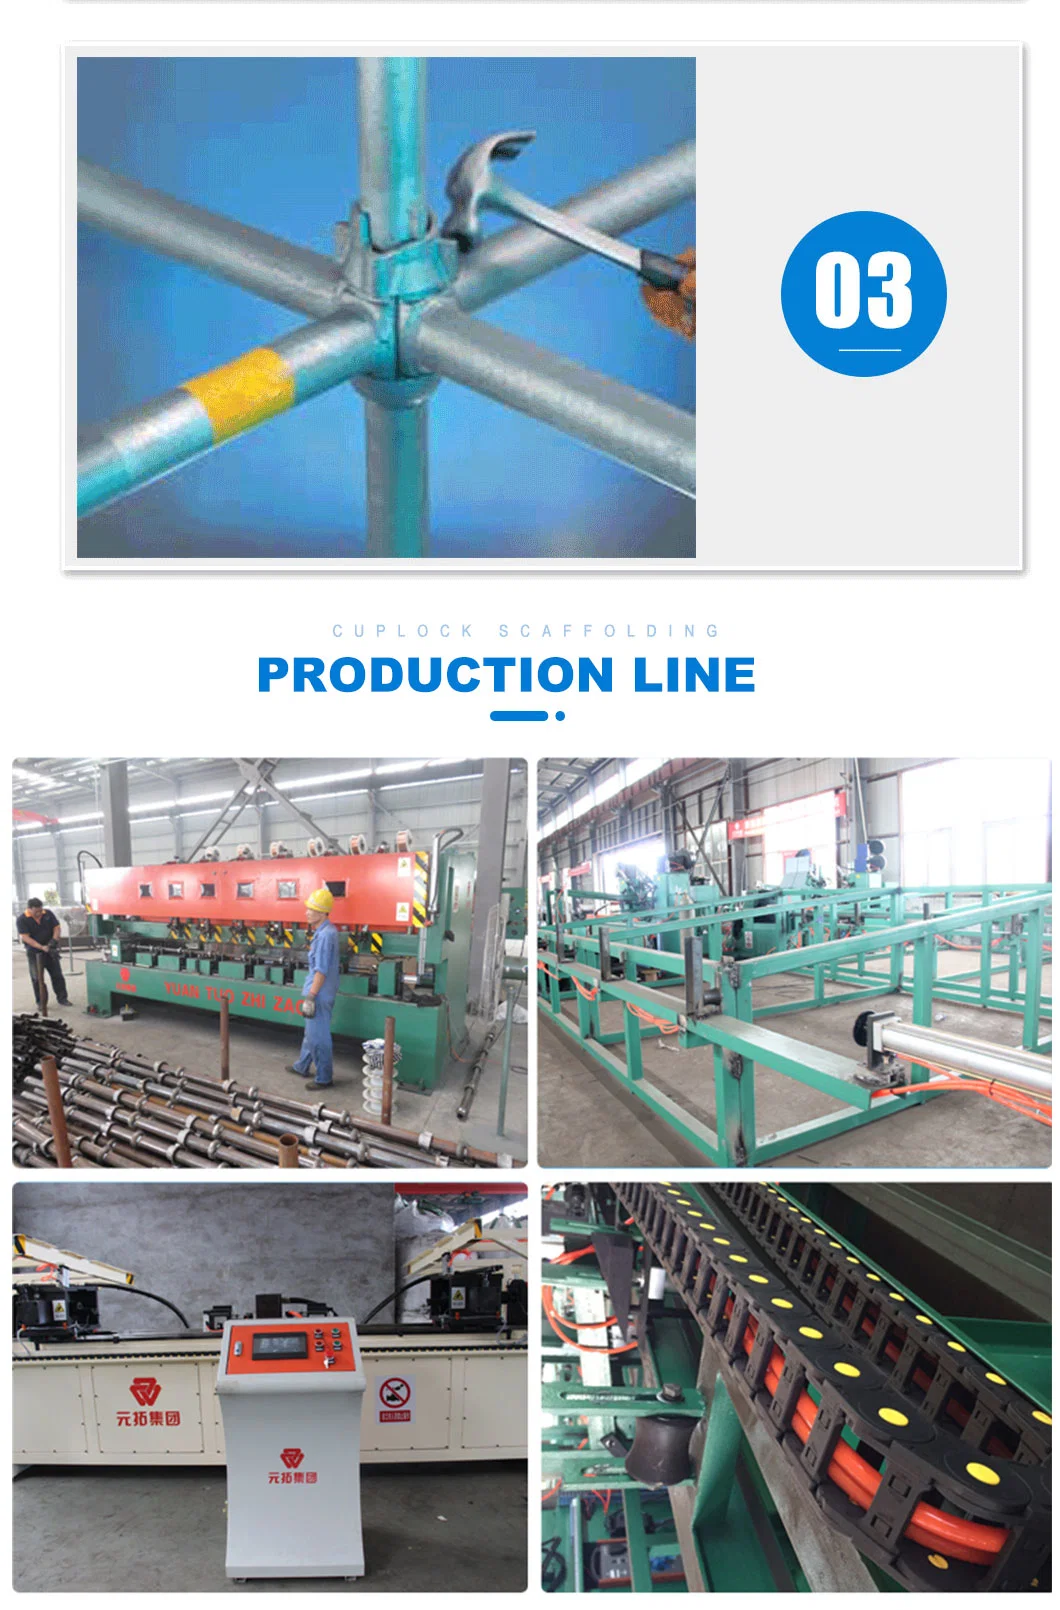 China Factory Price CE Certified Drop Forged Horizontal Ledger/Standard/Diagonal Brace for Quick Cuplock Access Scaffolding System